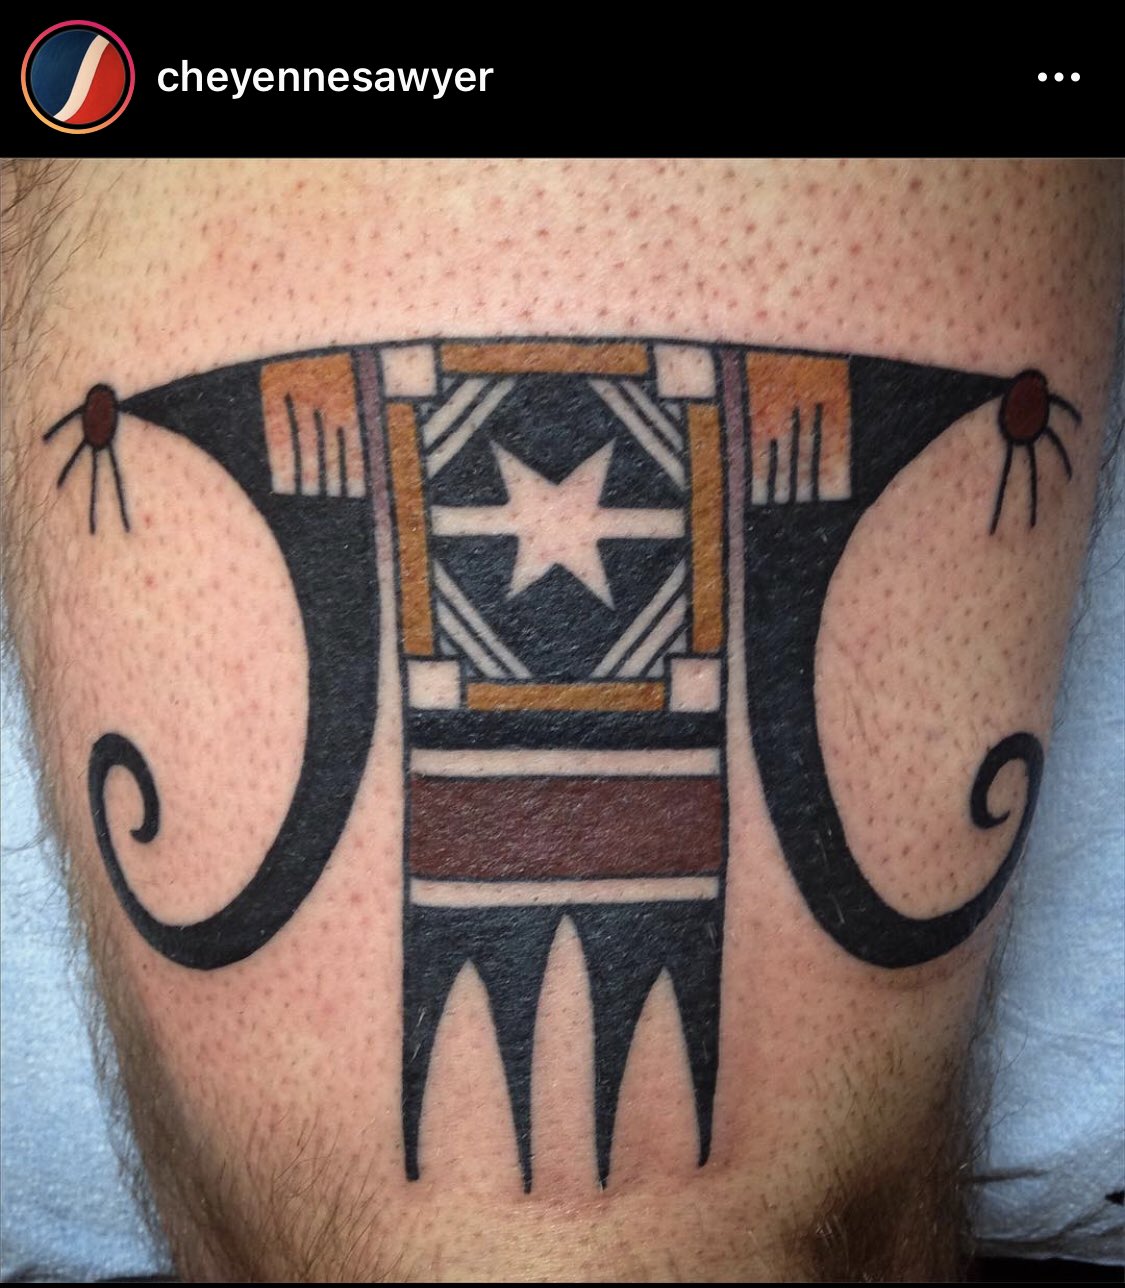 Iyáȟe Mató on X: "Cheyenne Sawyer, (@/cheyennesawyer on ig) is *the* definition of a culture-vulture. He's a white tattoo artist in Portland, Oregon that has made a career out of stealing Native